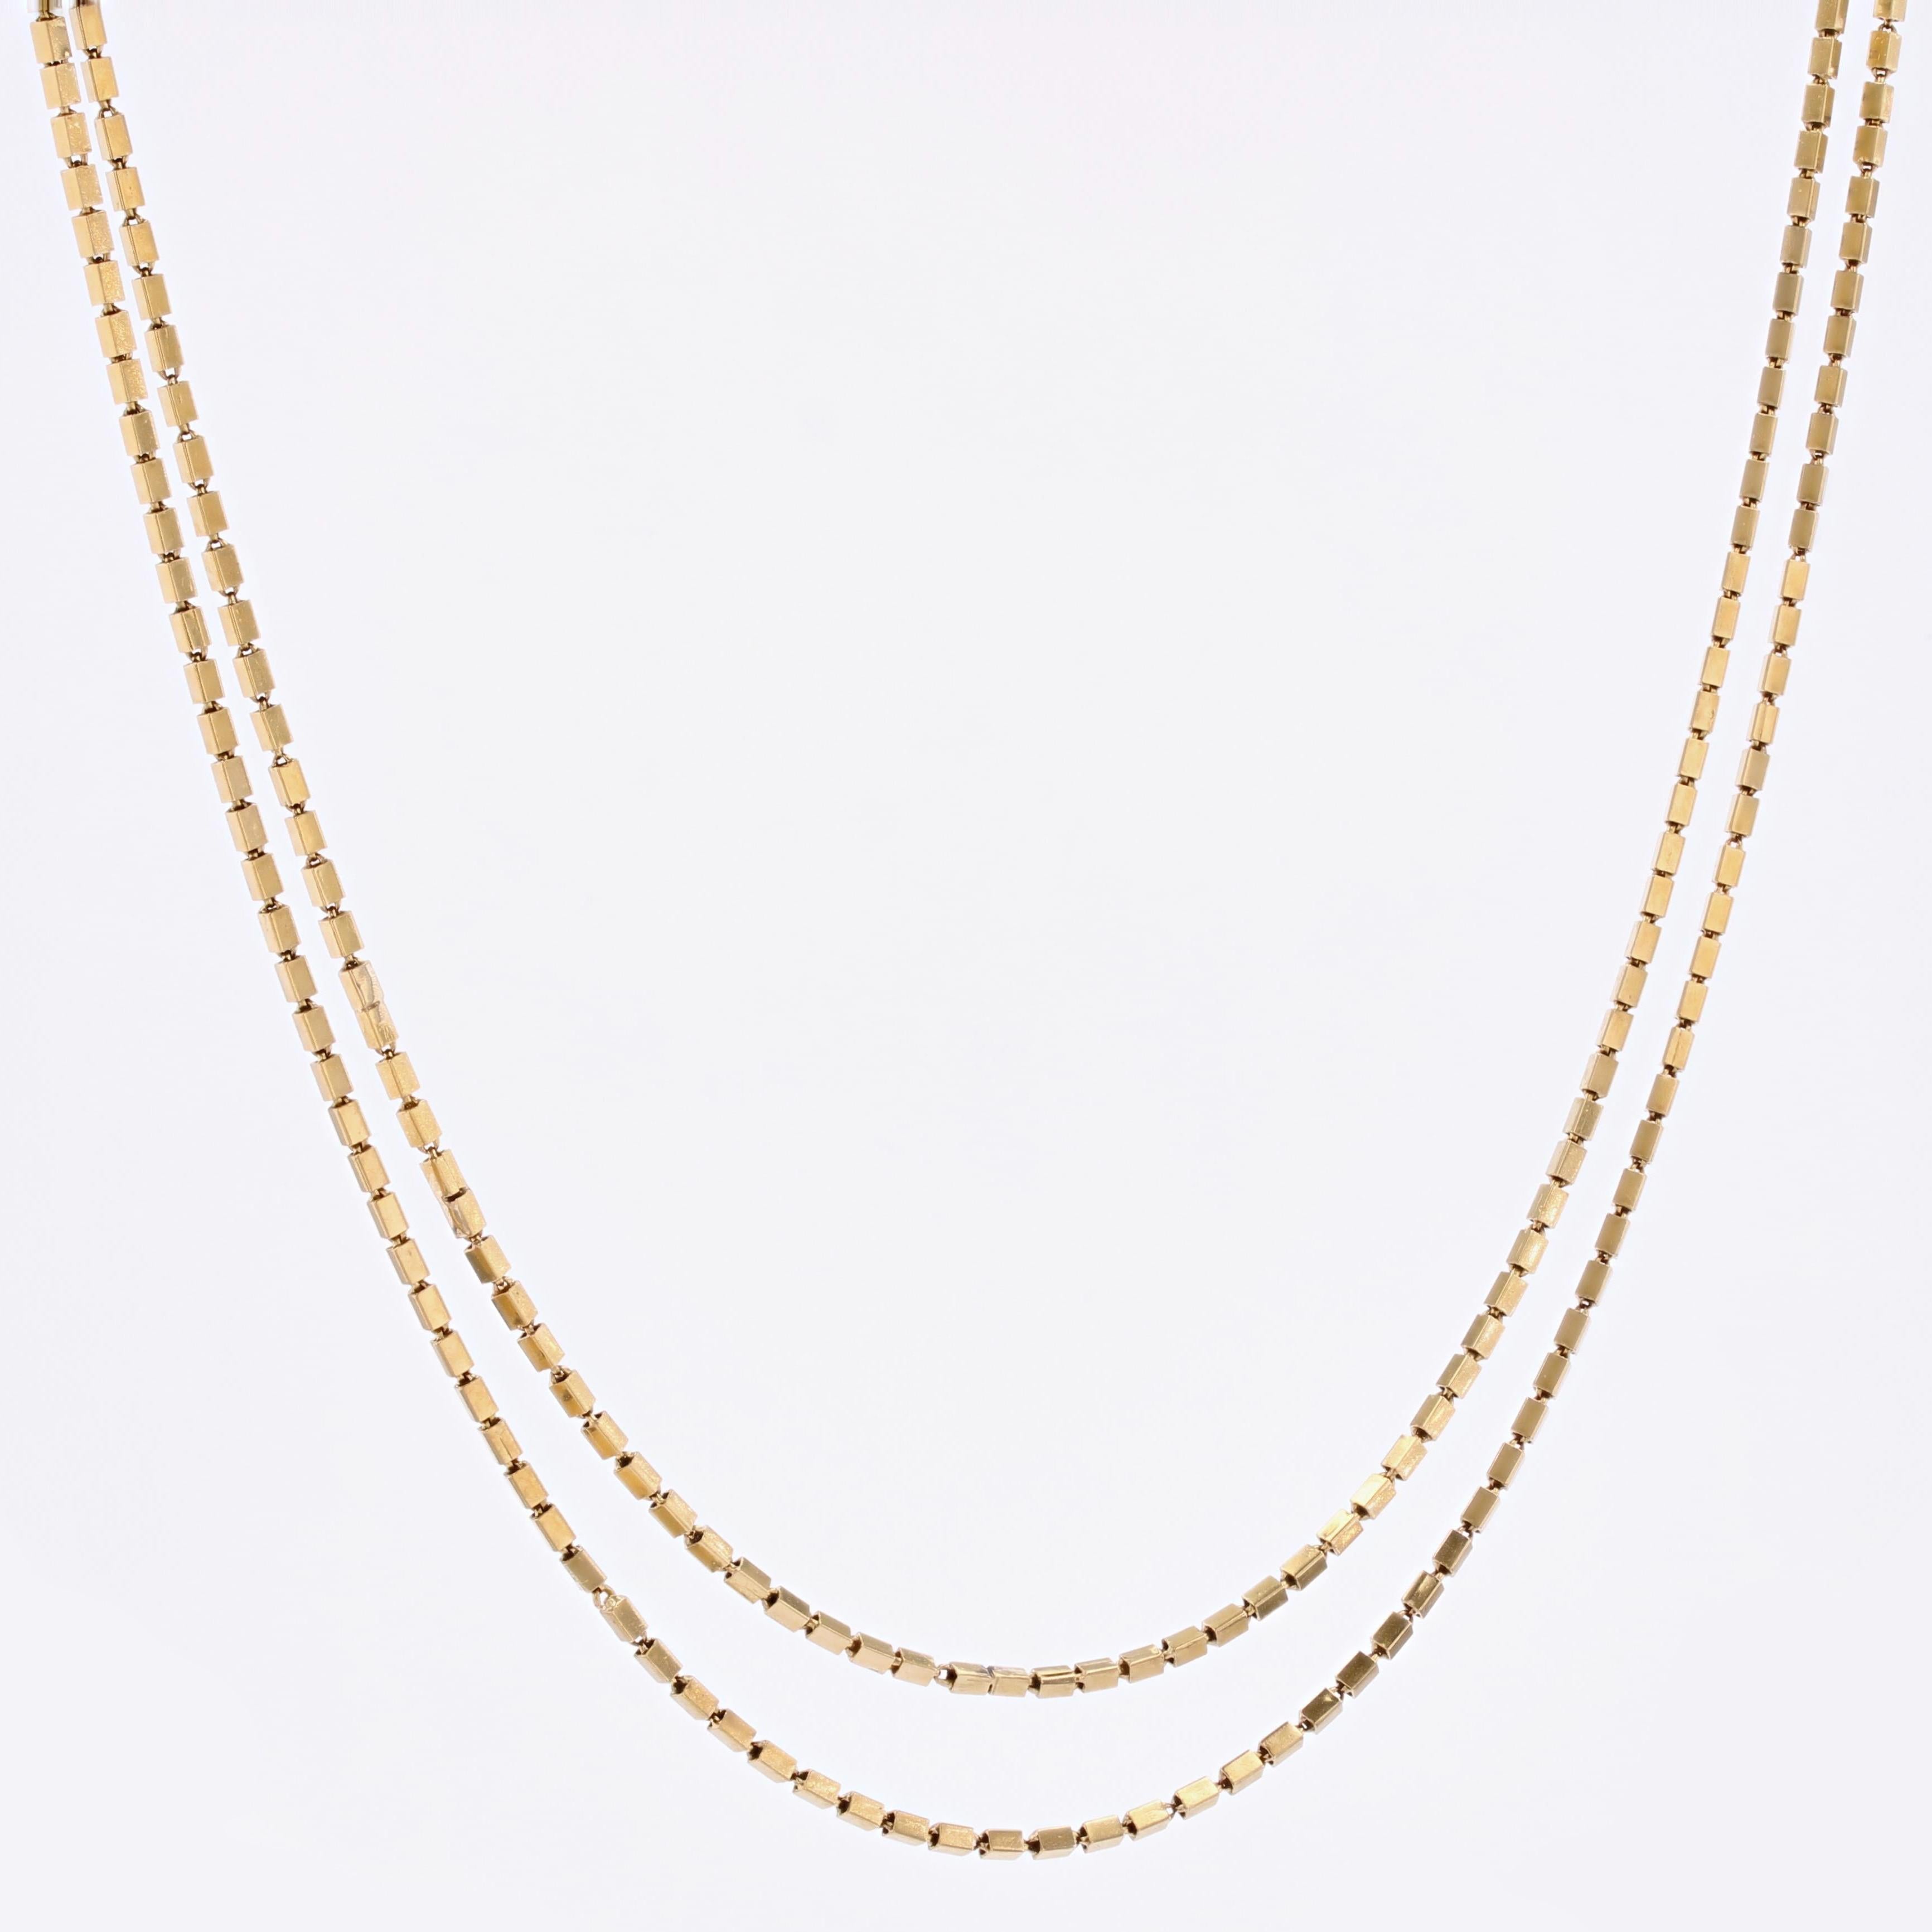 1950s 18 Karat Yellow Gold Double Row Rectangular Mesh Necklace In Good Condition For Sale In Poitiers, FR